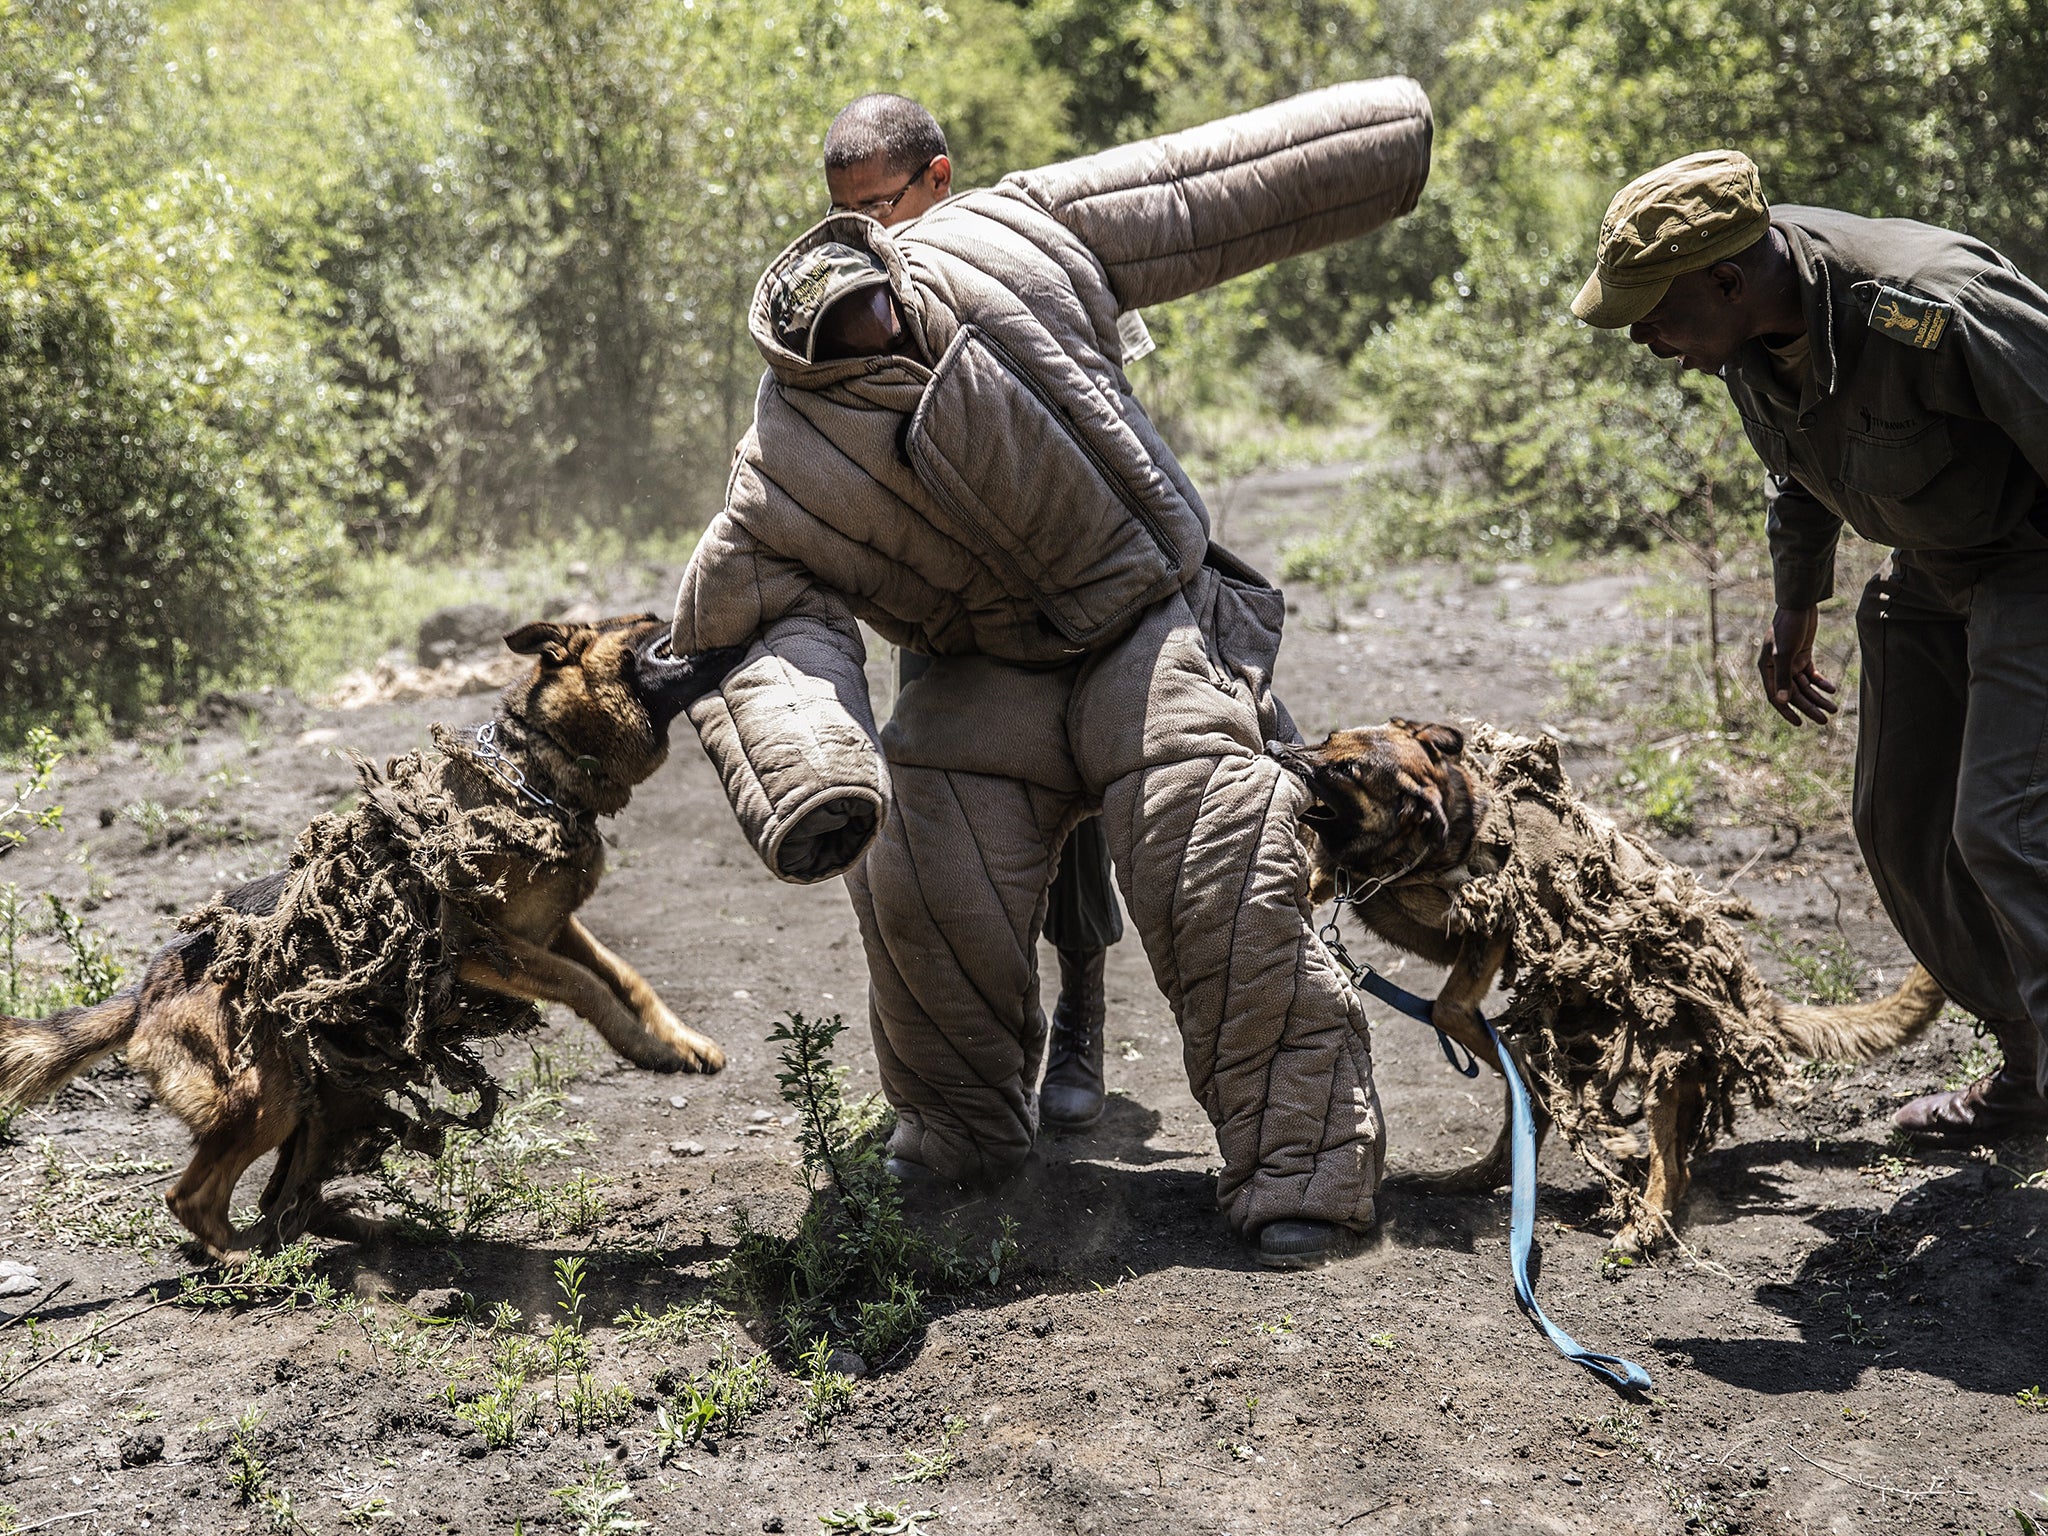 Ranger trainees and trainee dogs simulate an ambush against rhino poachers at the Paramount Group Anti-Poaching training and K9 (canine) academy on November 26, 2014 in Magaliesberg, South Africa.